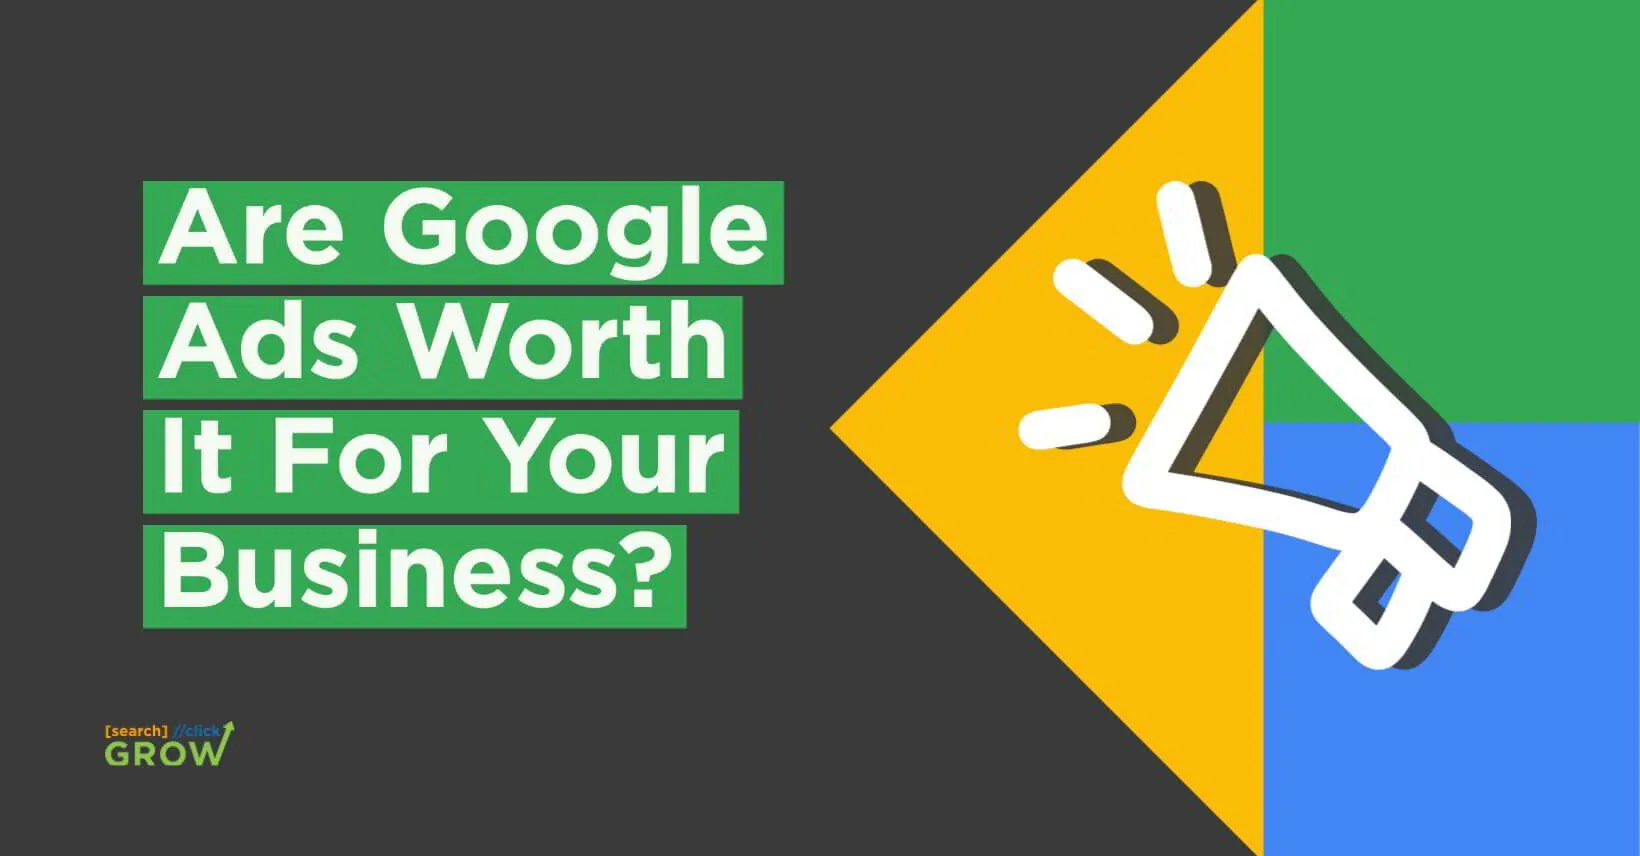 Are Google Ads Worth It For You Business?